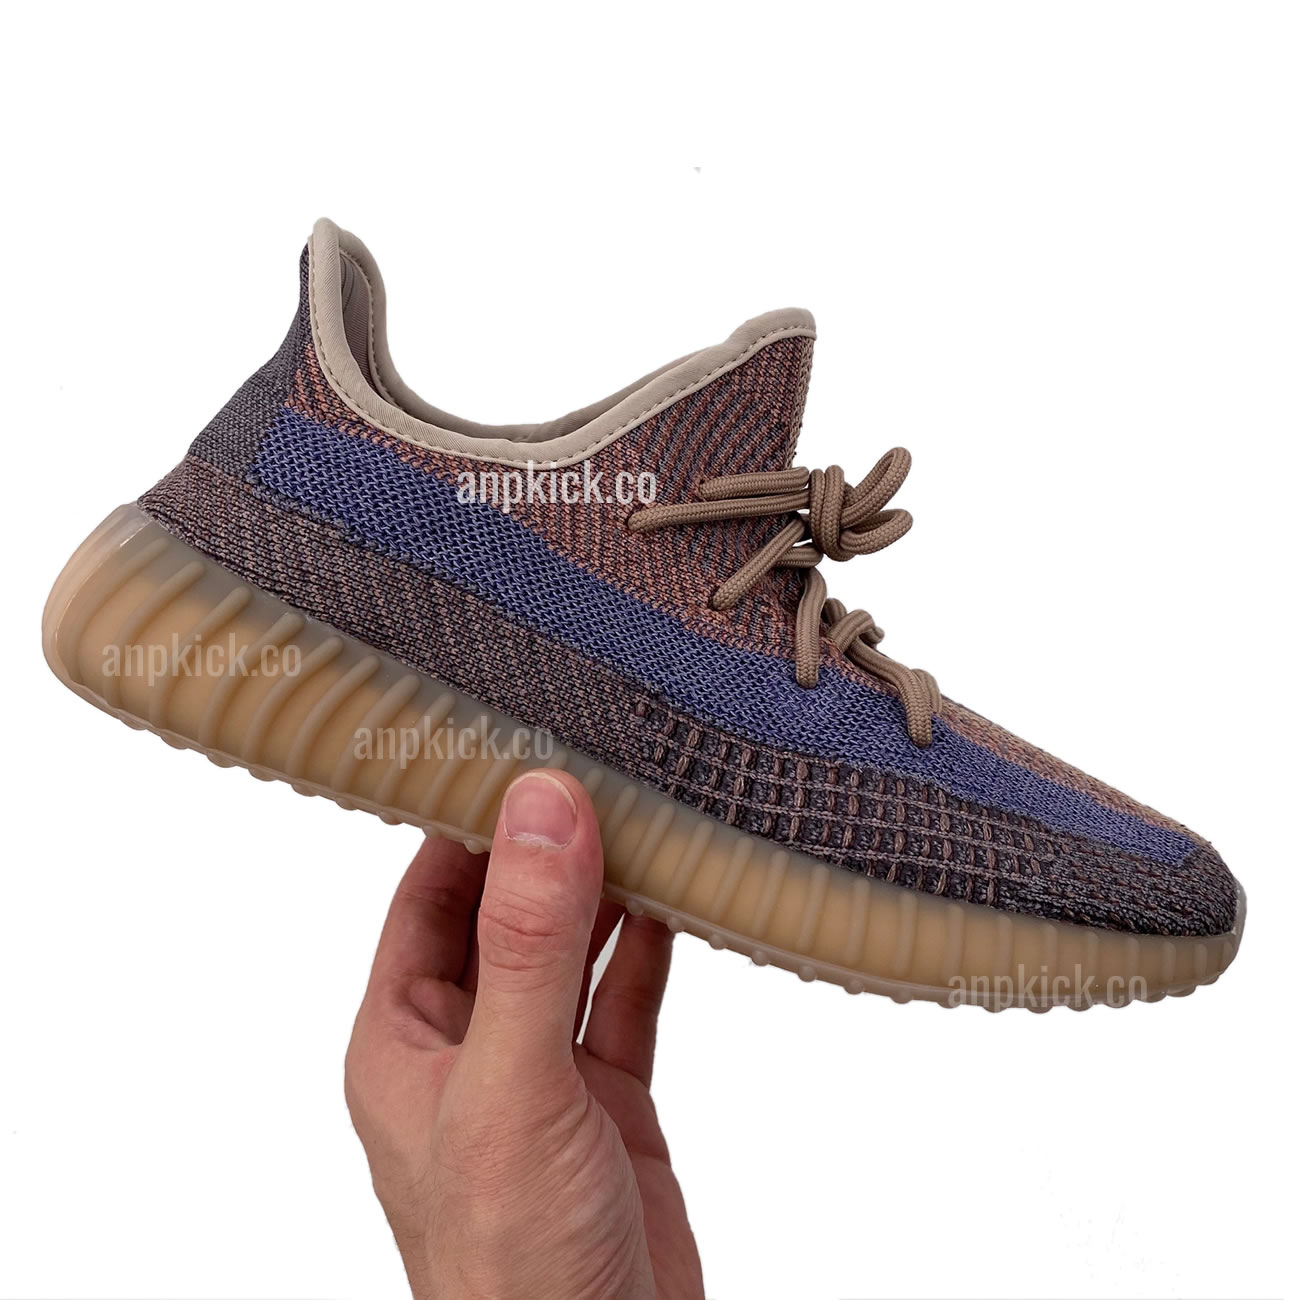 Adidas Yeezy Boost 350 V2 Yecher Ho2795 New Release Date First Look (11) - www.newkick.org